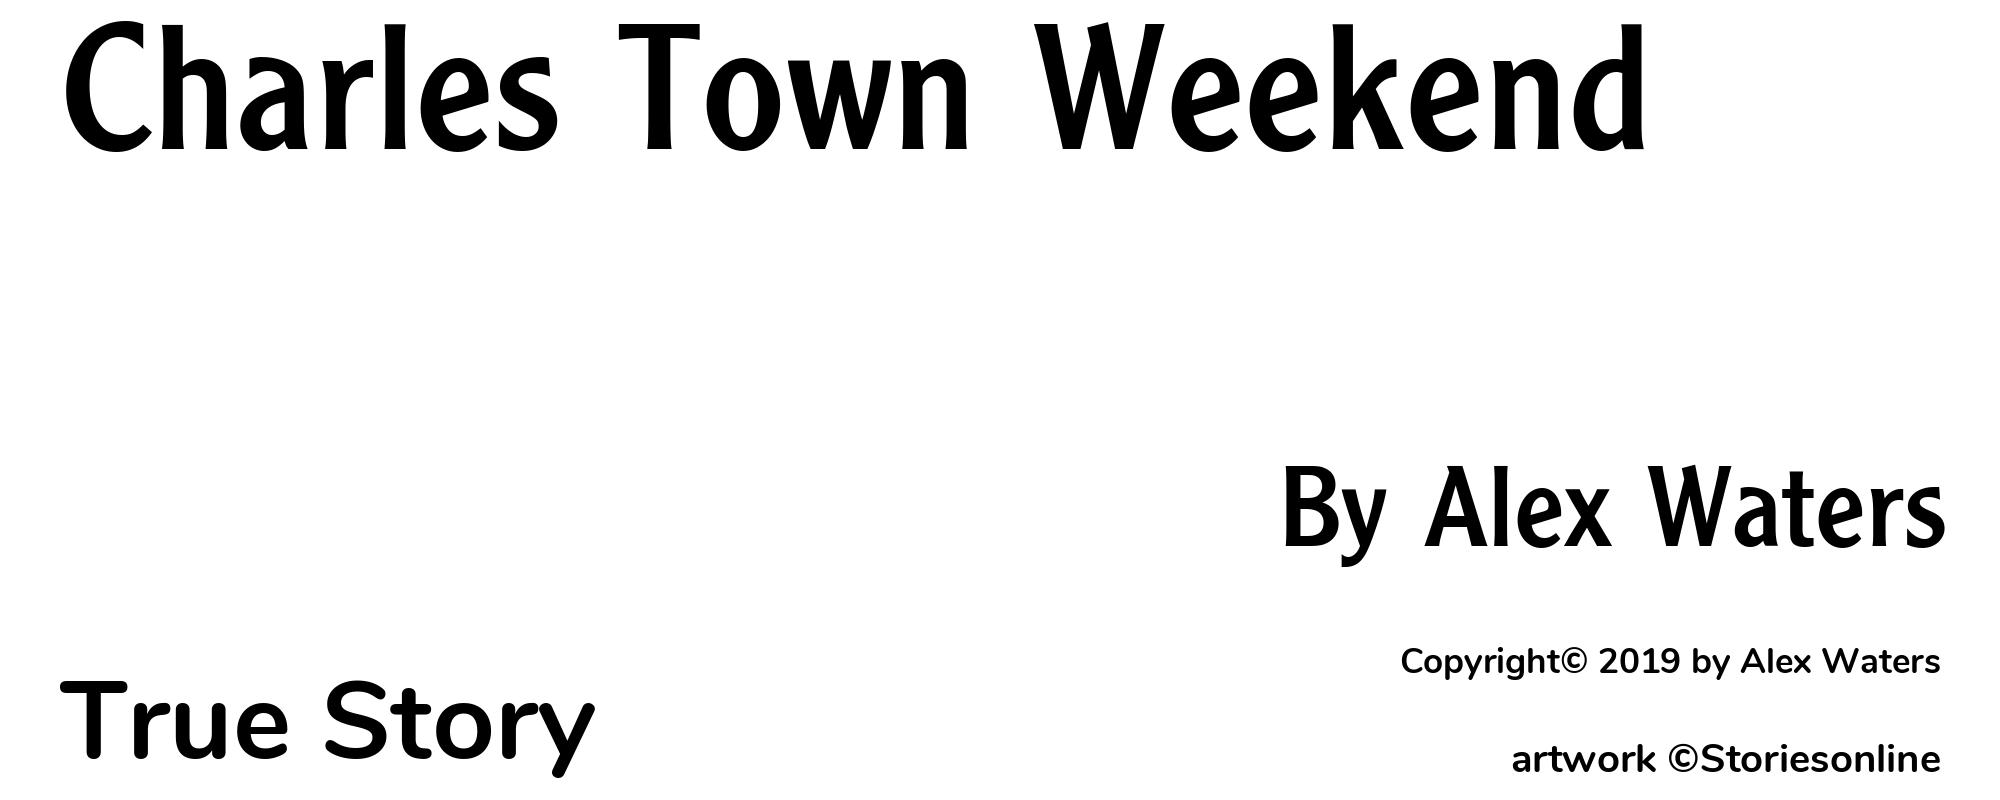 Charles Town Weekend - Cover